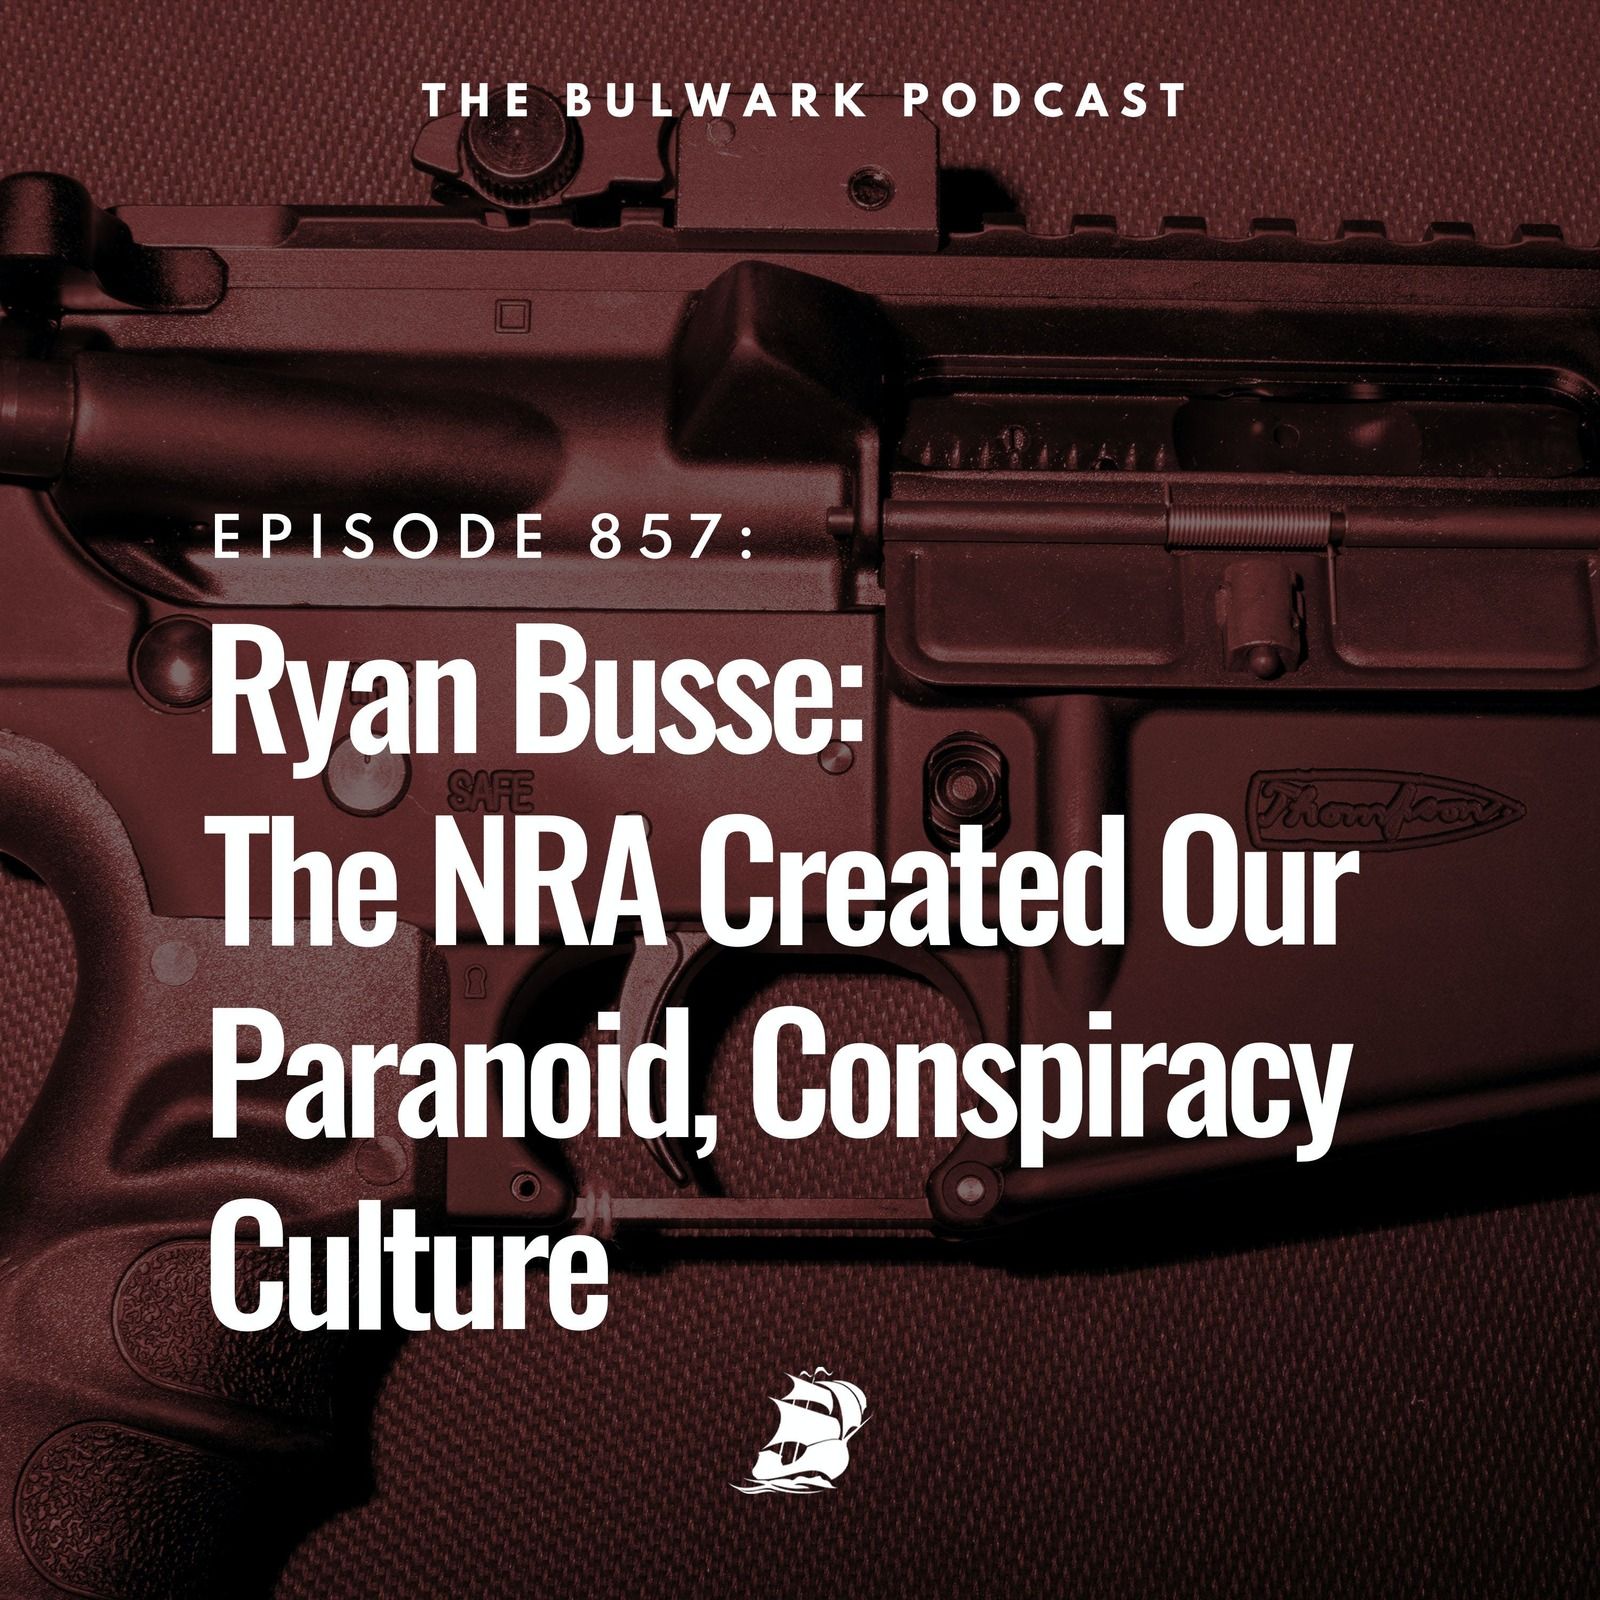 Ryan Busse: The NRA Created Our Paranoid, Conspiracy Culture